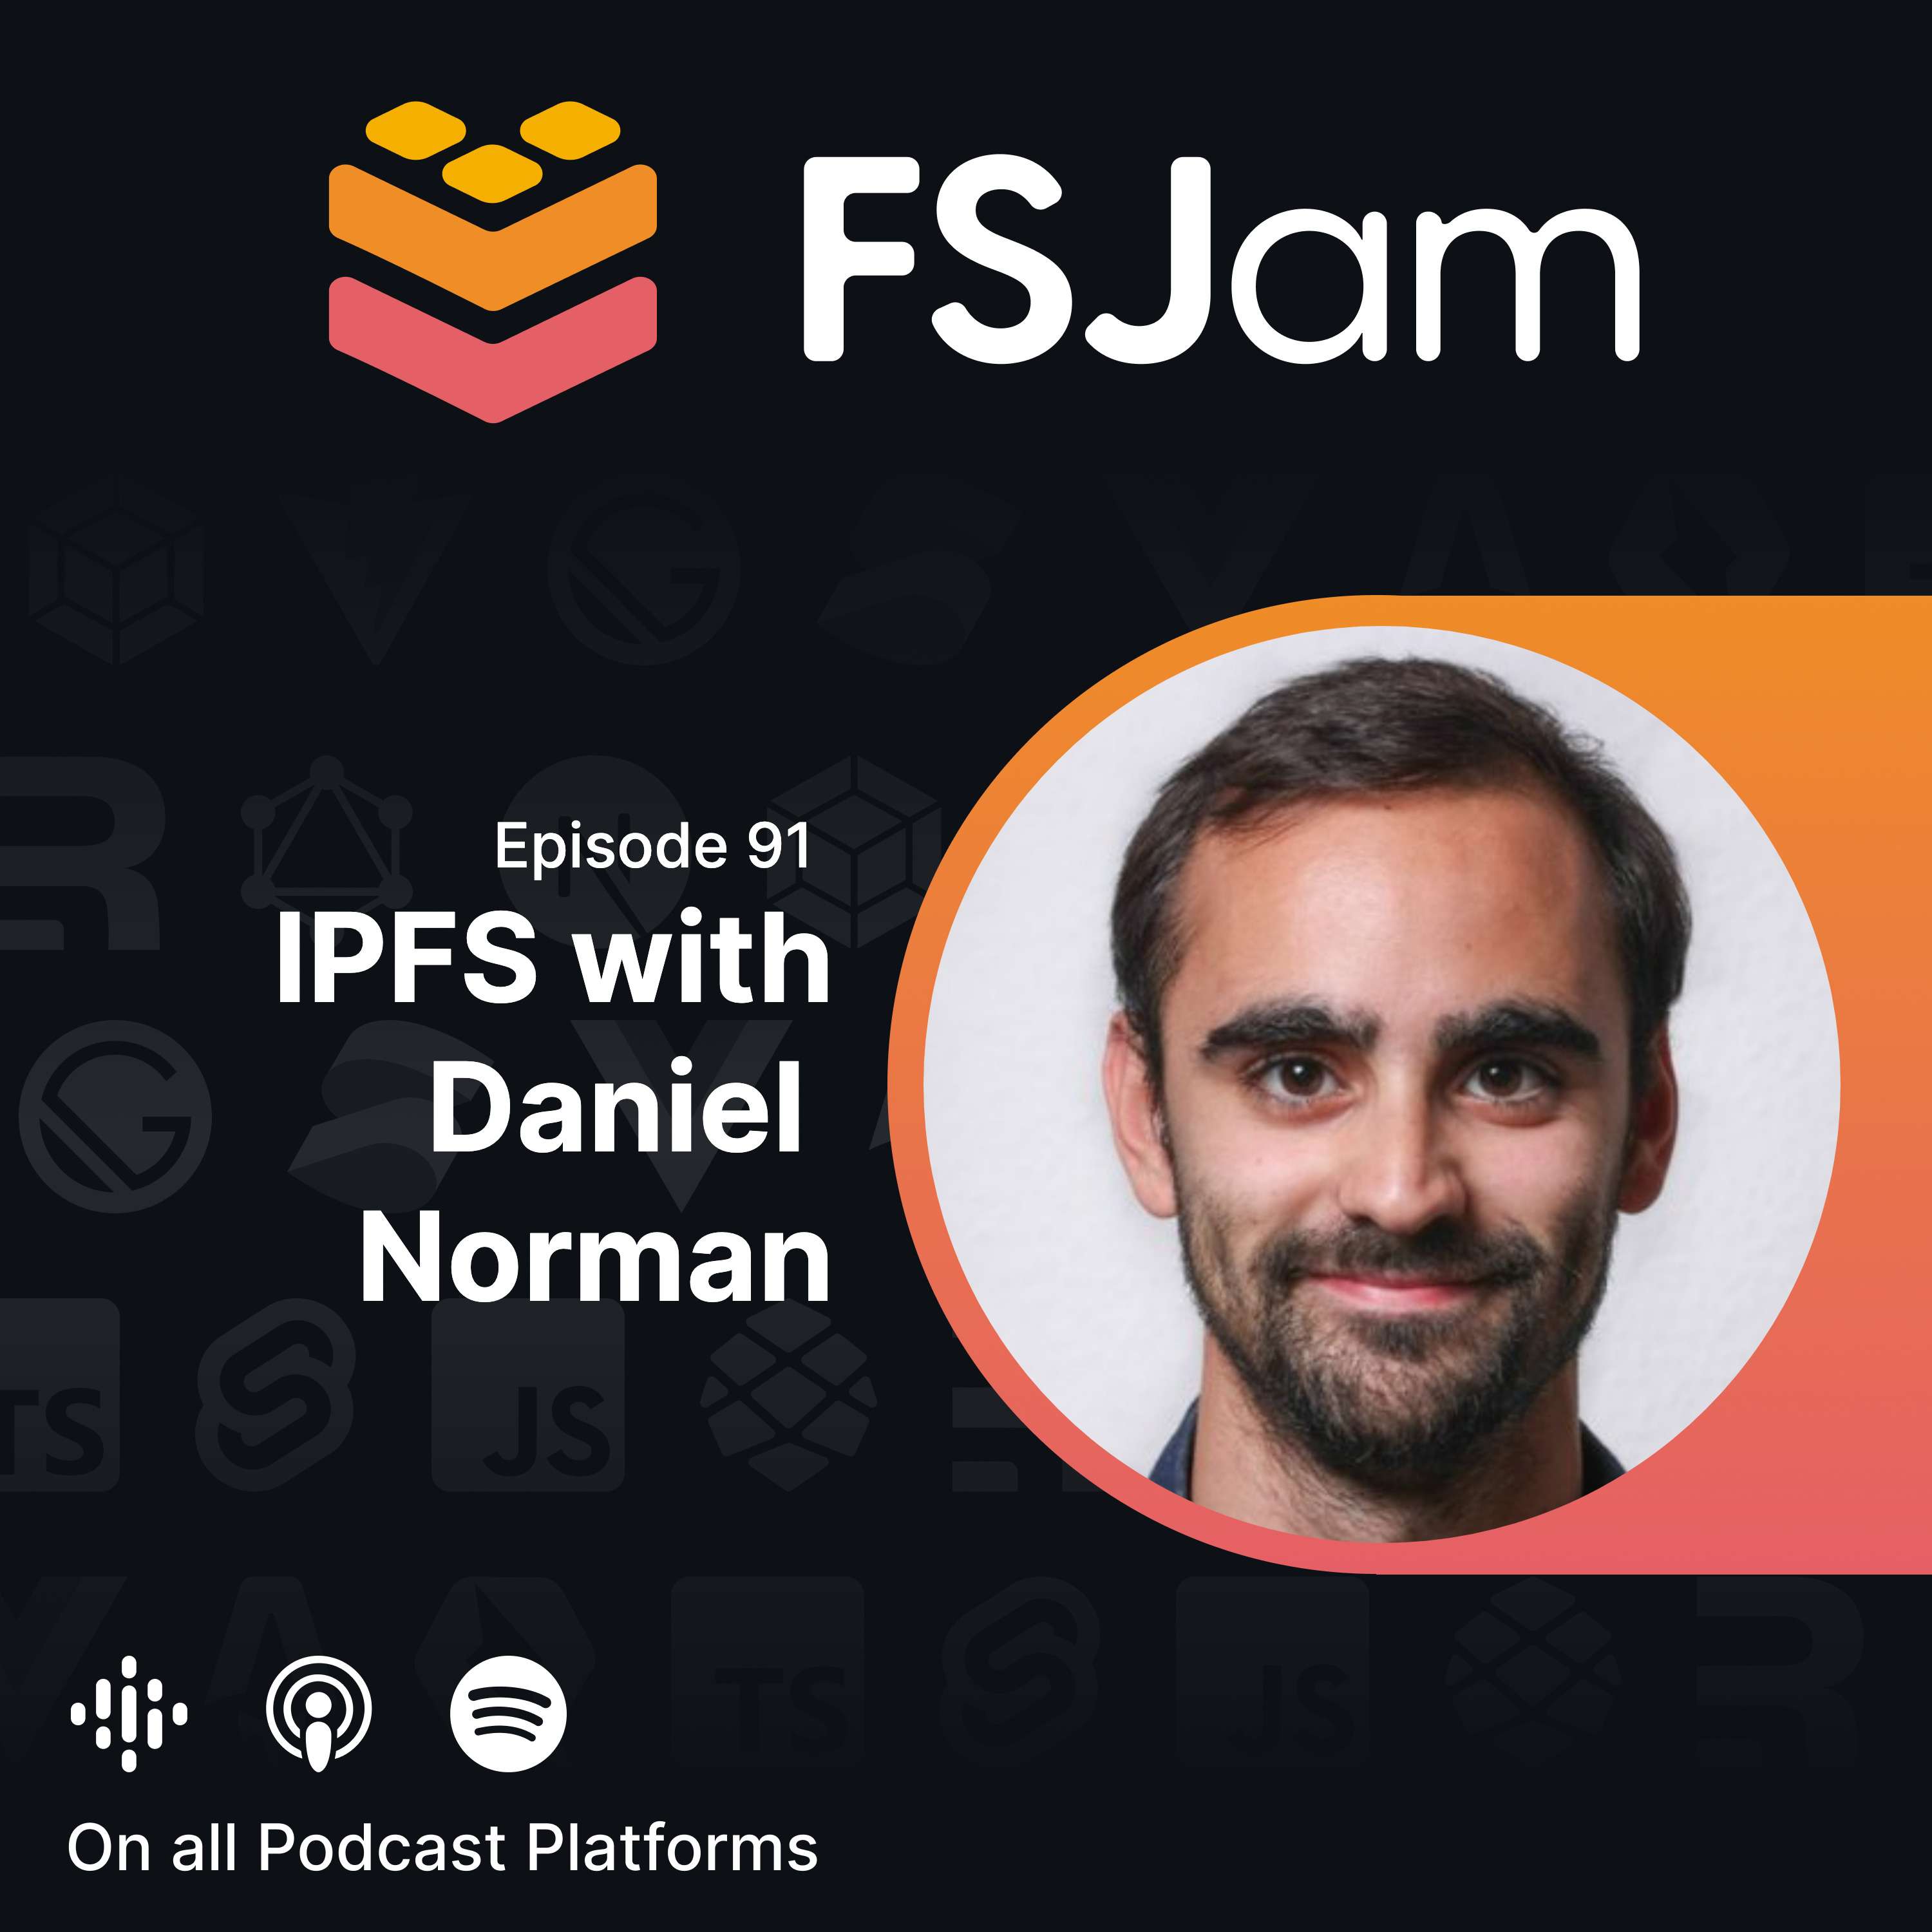 Episode 91 - IPFS with Daniel Norman